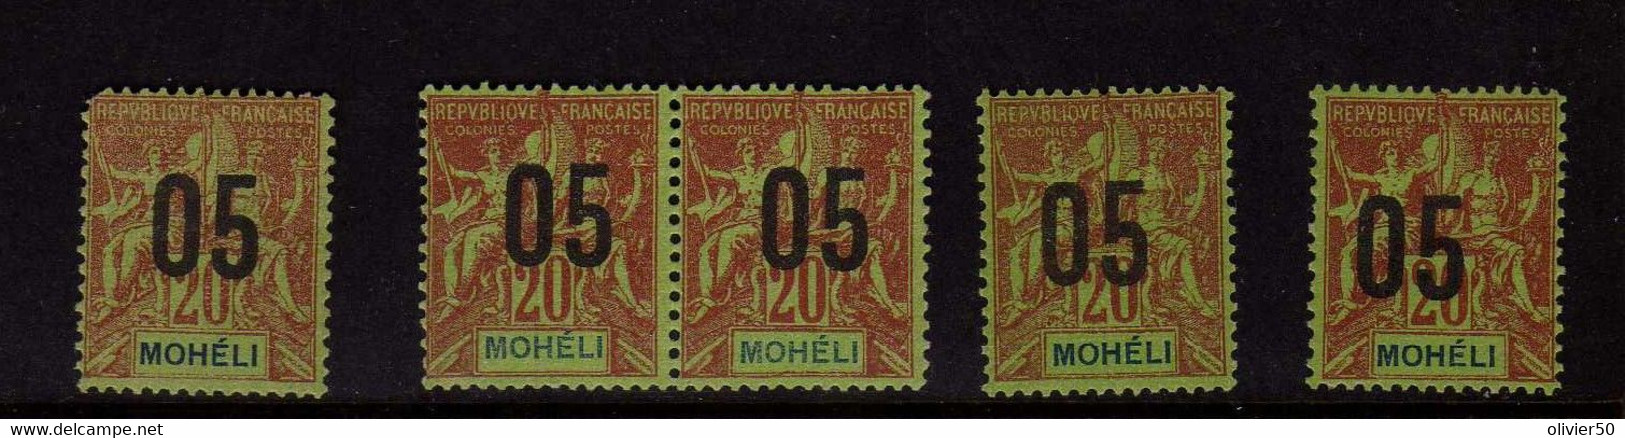 Moheli (1912) - Type Groupe  Surcharge    Neuf* - MH - Unused Stamps